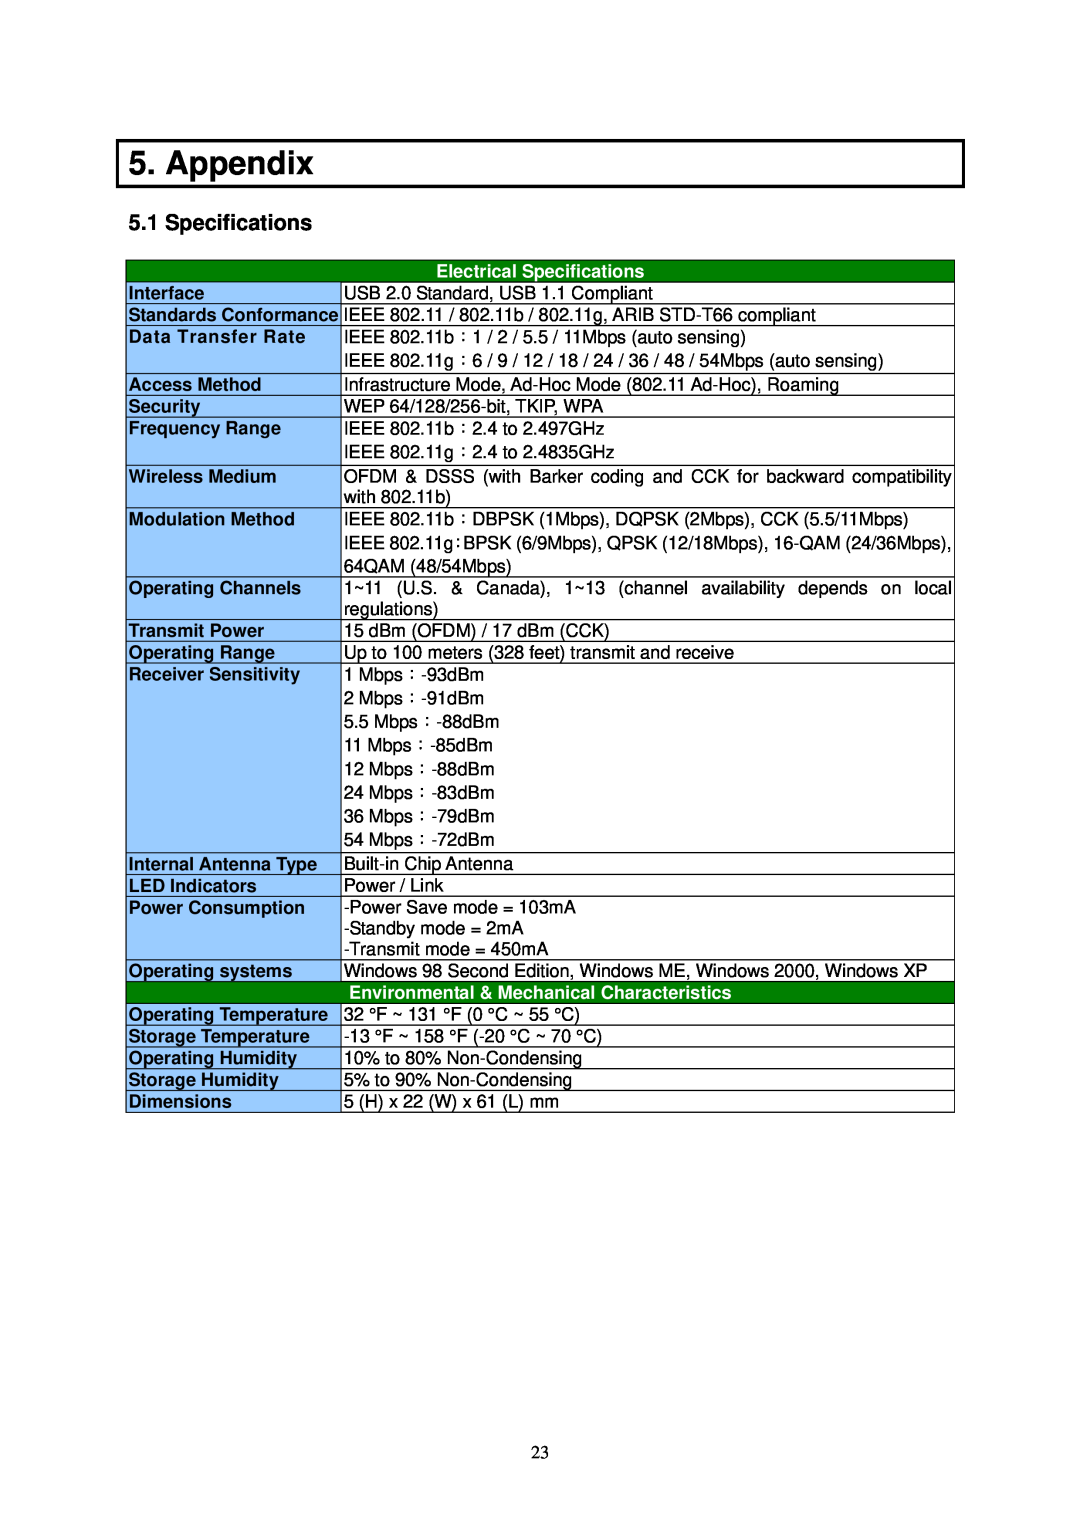 Airlink AWLL3025 user manual Appendix, Electrical Specifications, Environmental & Mechanical Characteristics 